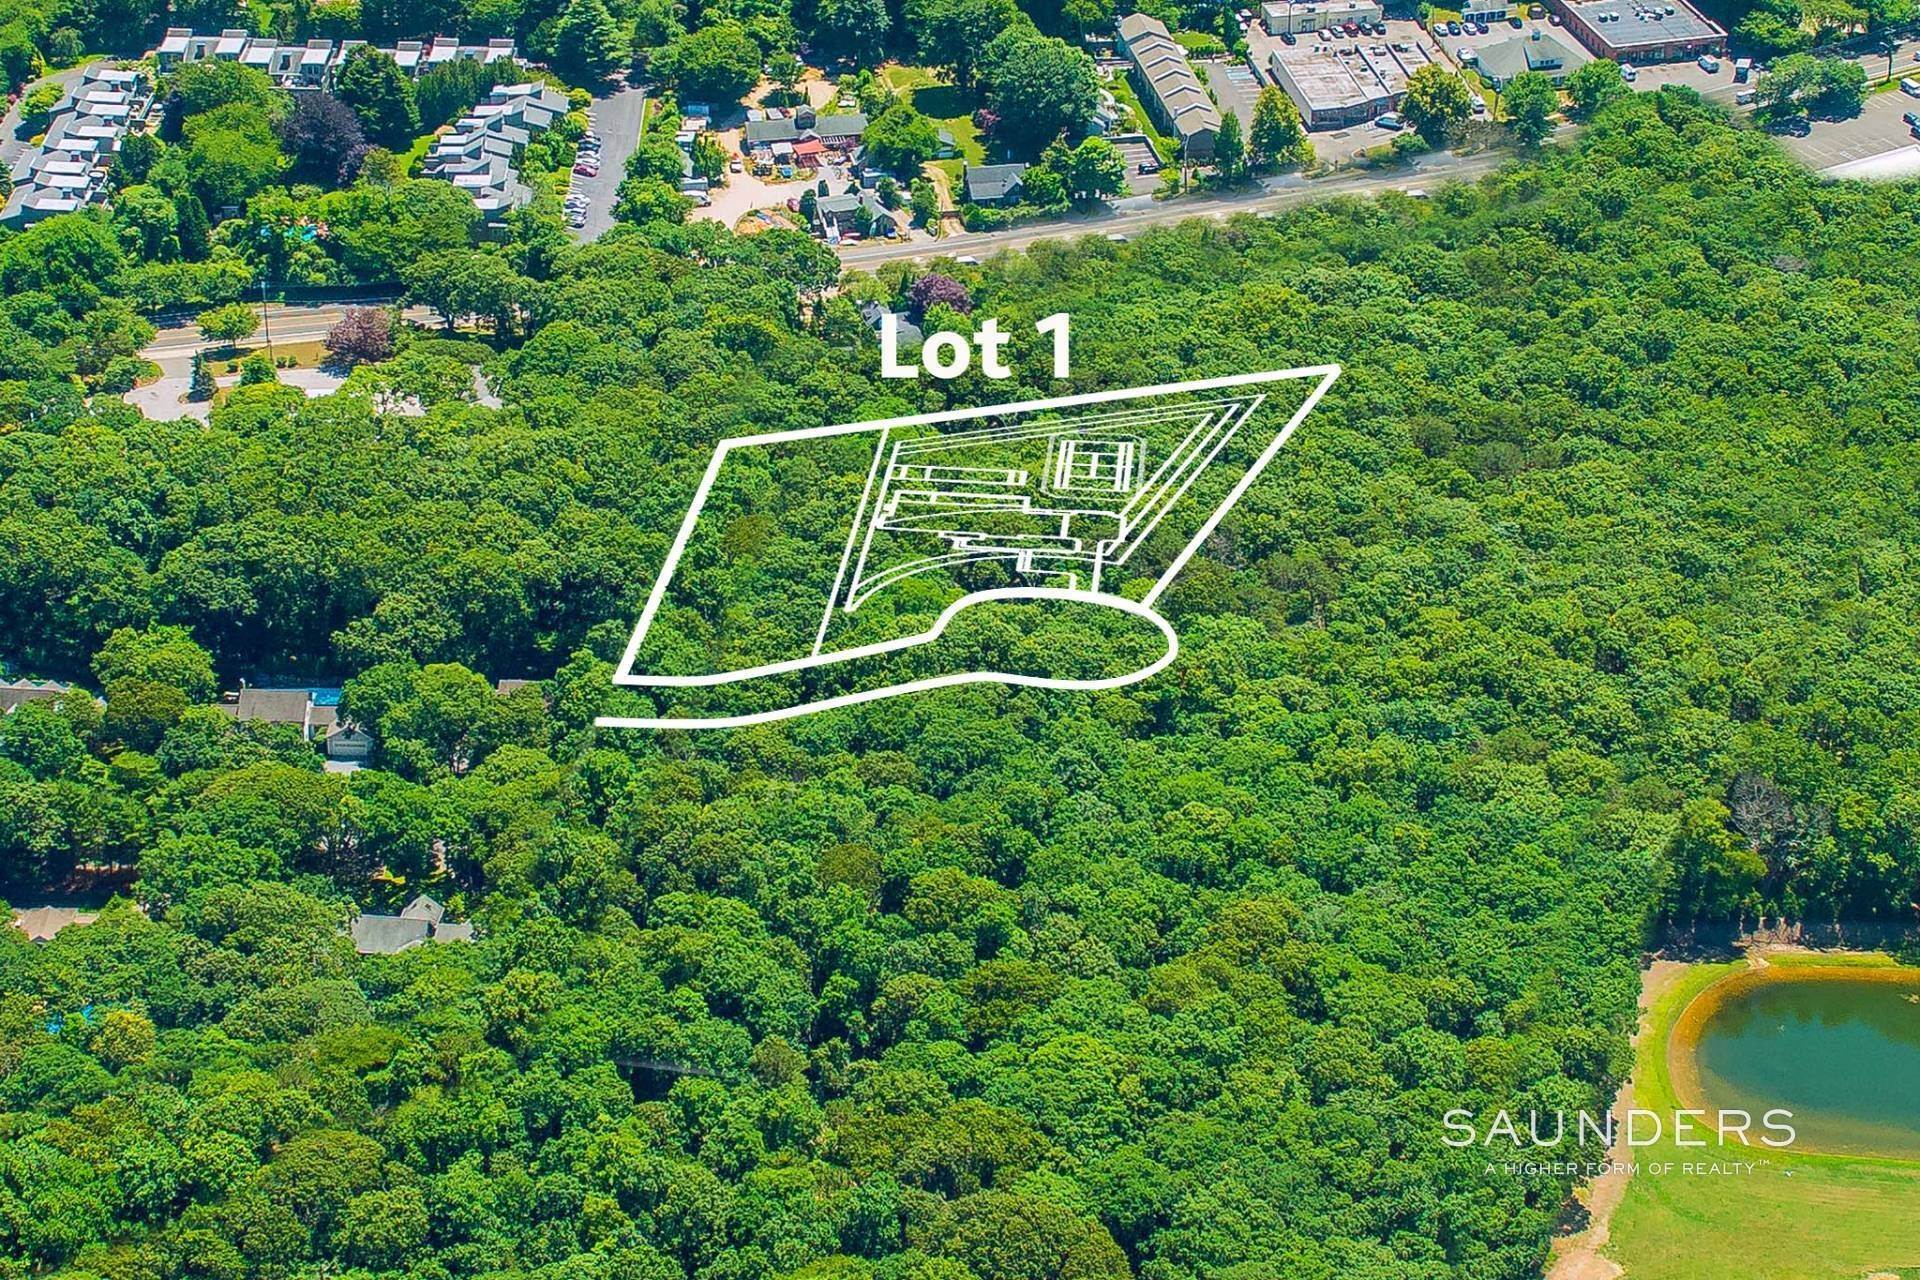 3. Land for Sale at Luxury Development Opportunity Holly Place, Lots 1 - 4, East Hampton North, East Hampton, NY 11937